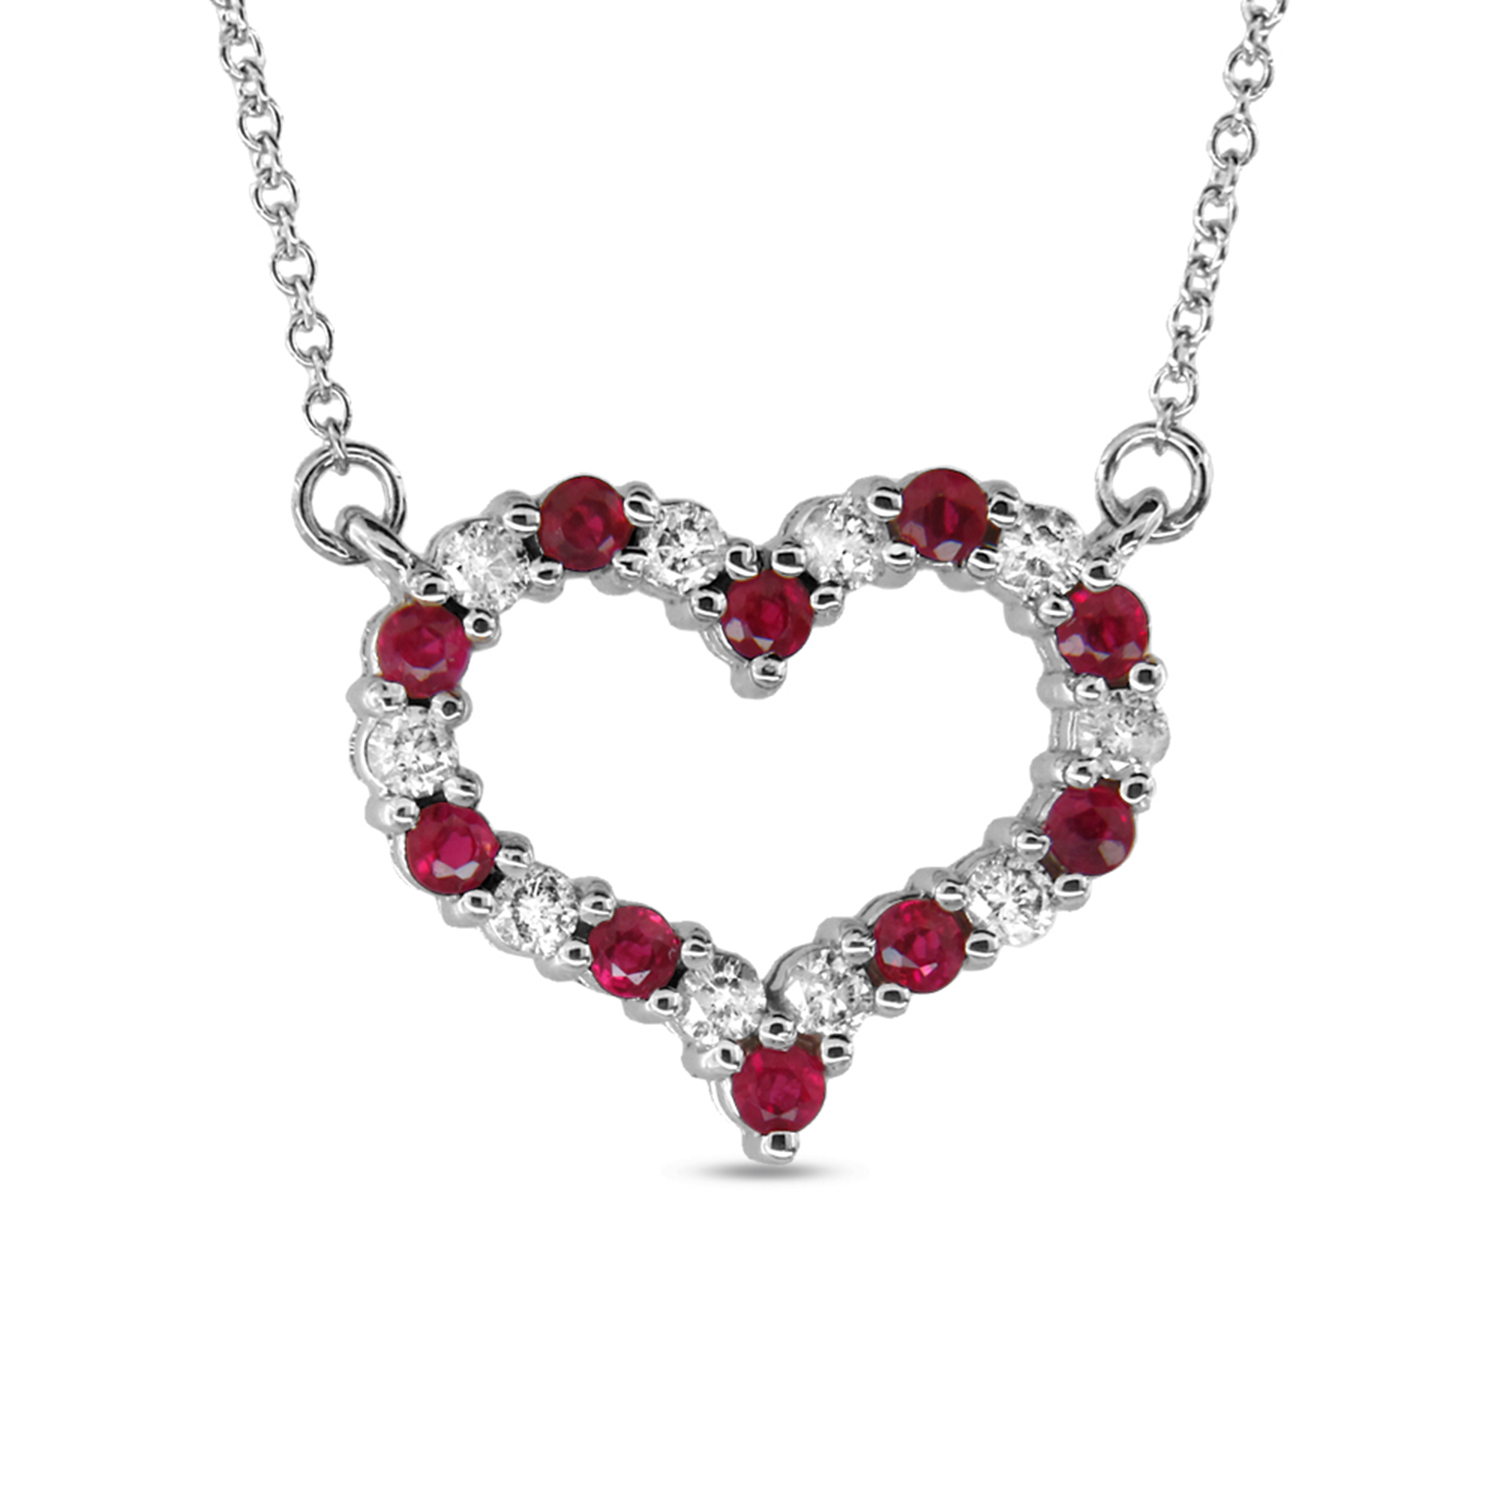 View 0.35ctw Diamond and Ruby Pendant in 14k White Gold